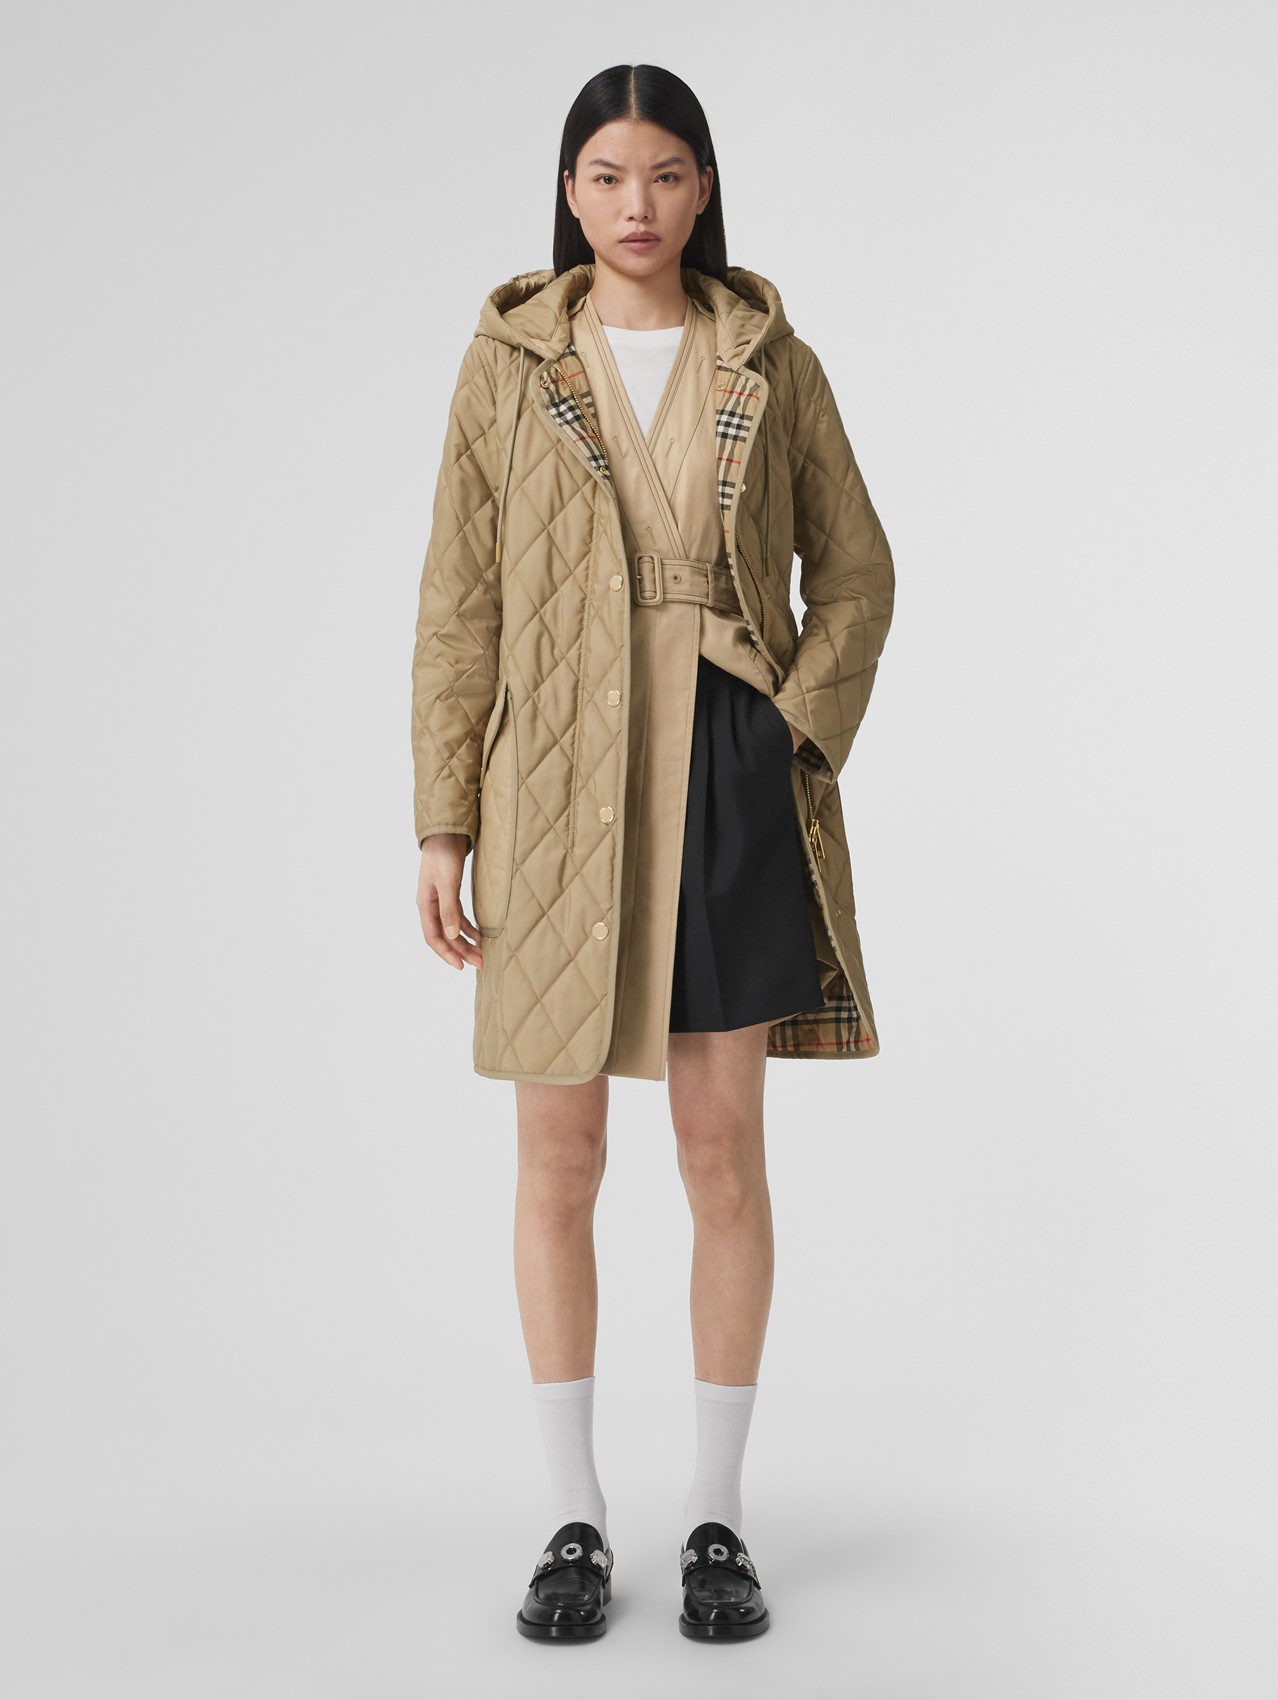 Diamond Quilted Thermoregulated Hooded Coat in Archive Beige